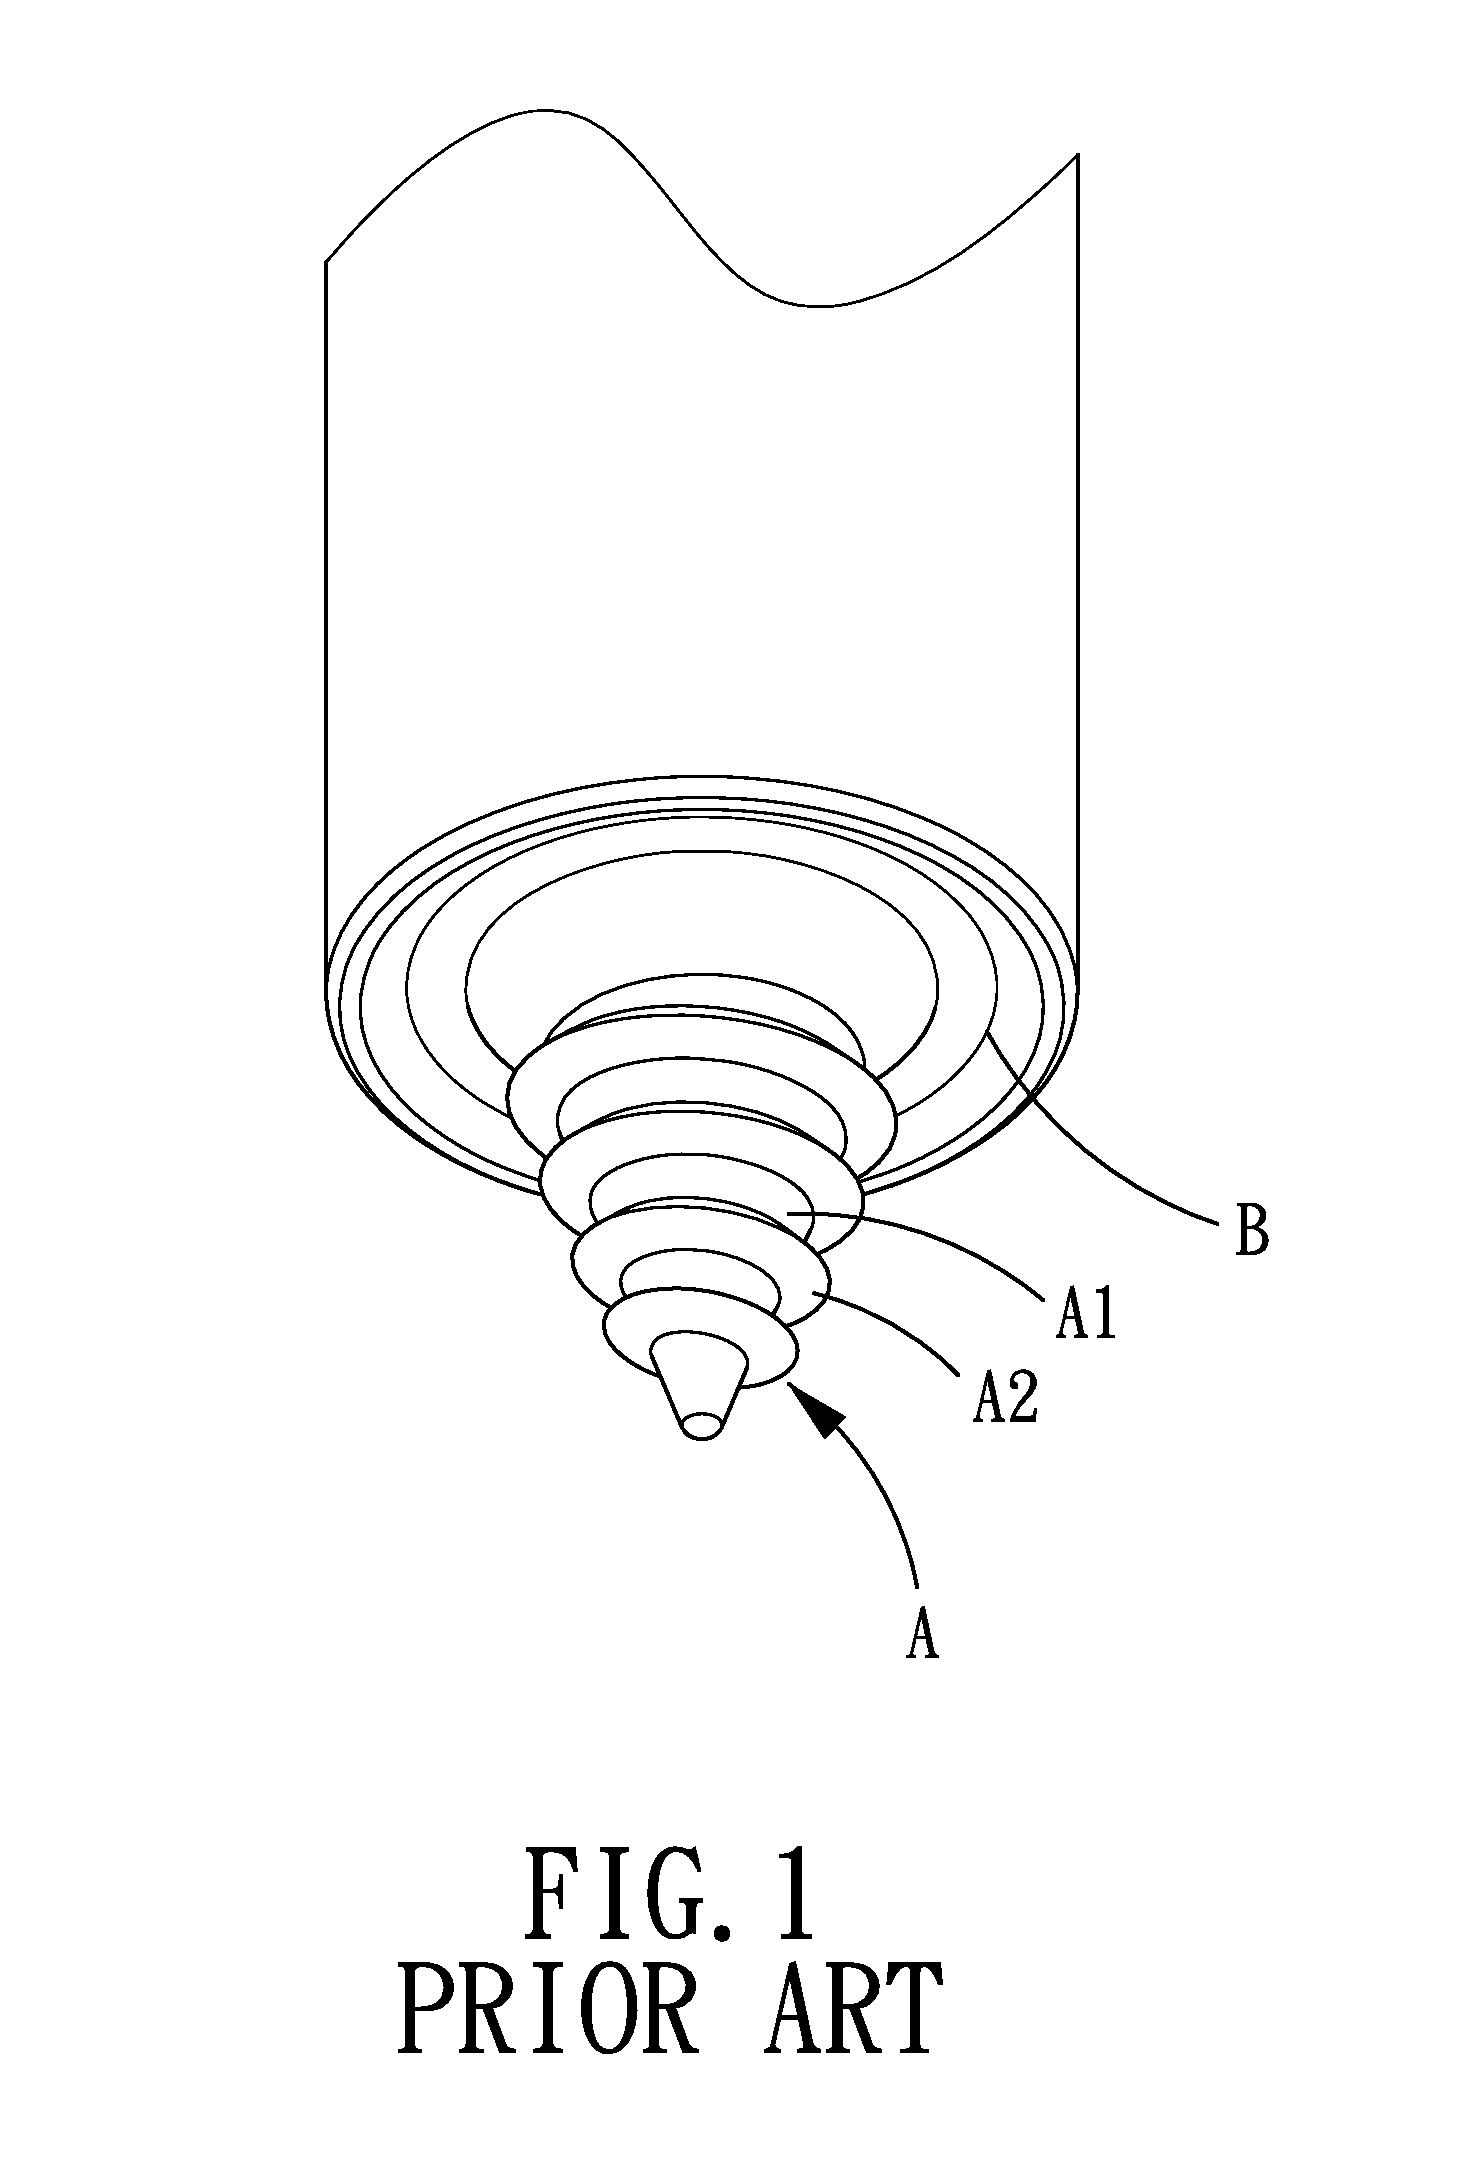 Friction Stir Welding Tool and Weld Metal Structure with Plural Onion Rings